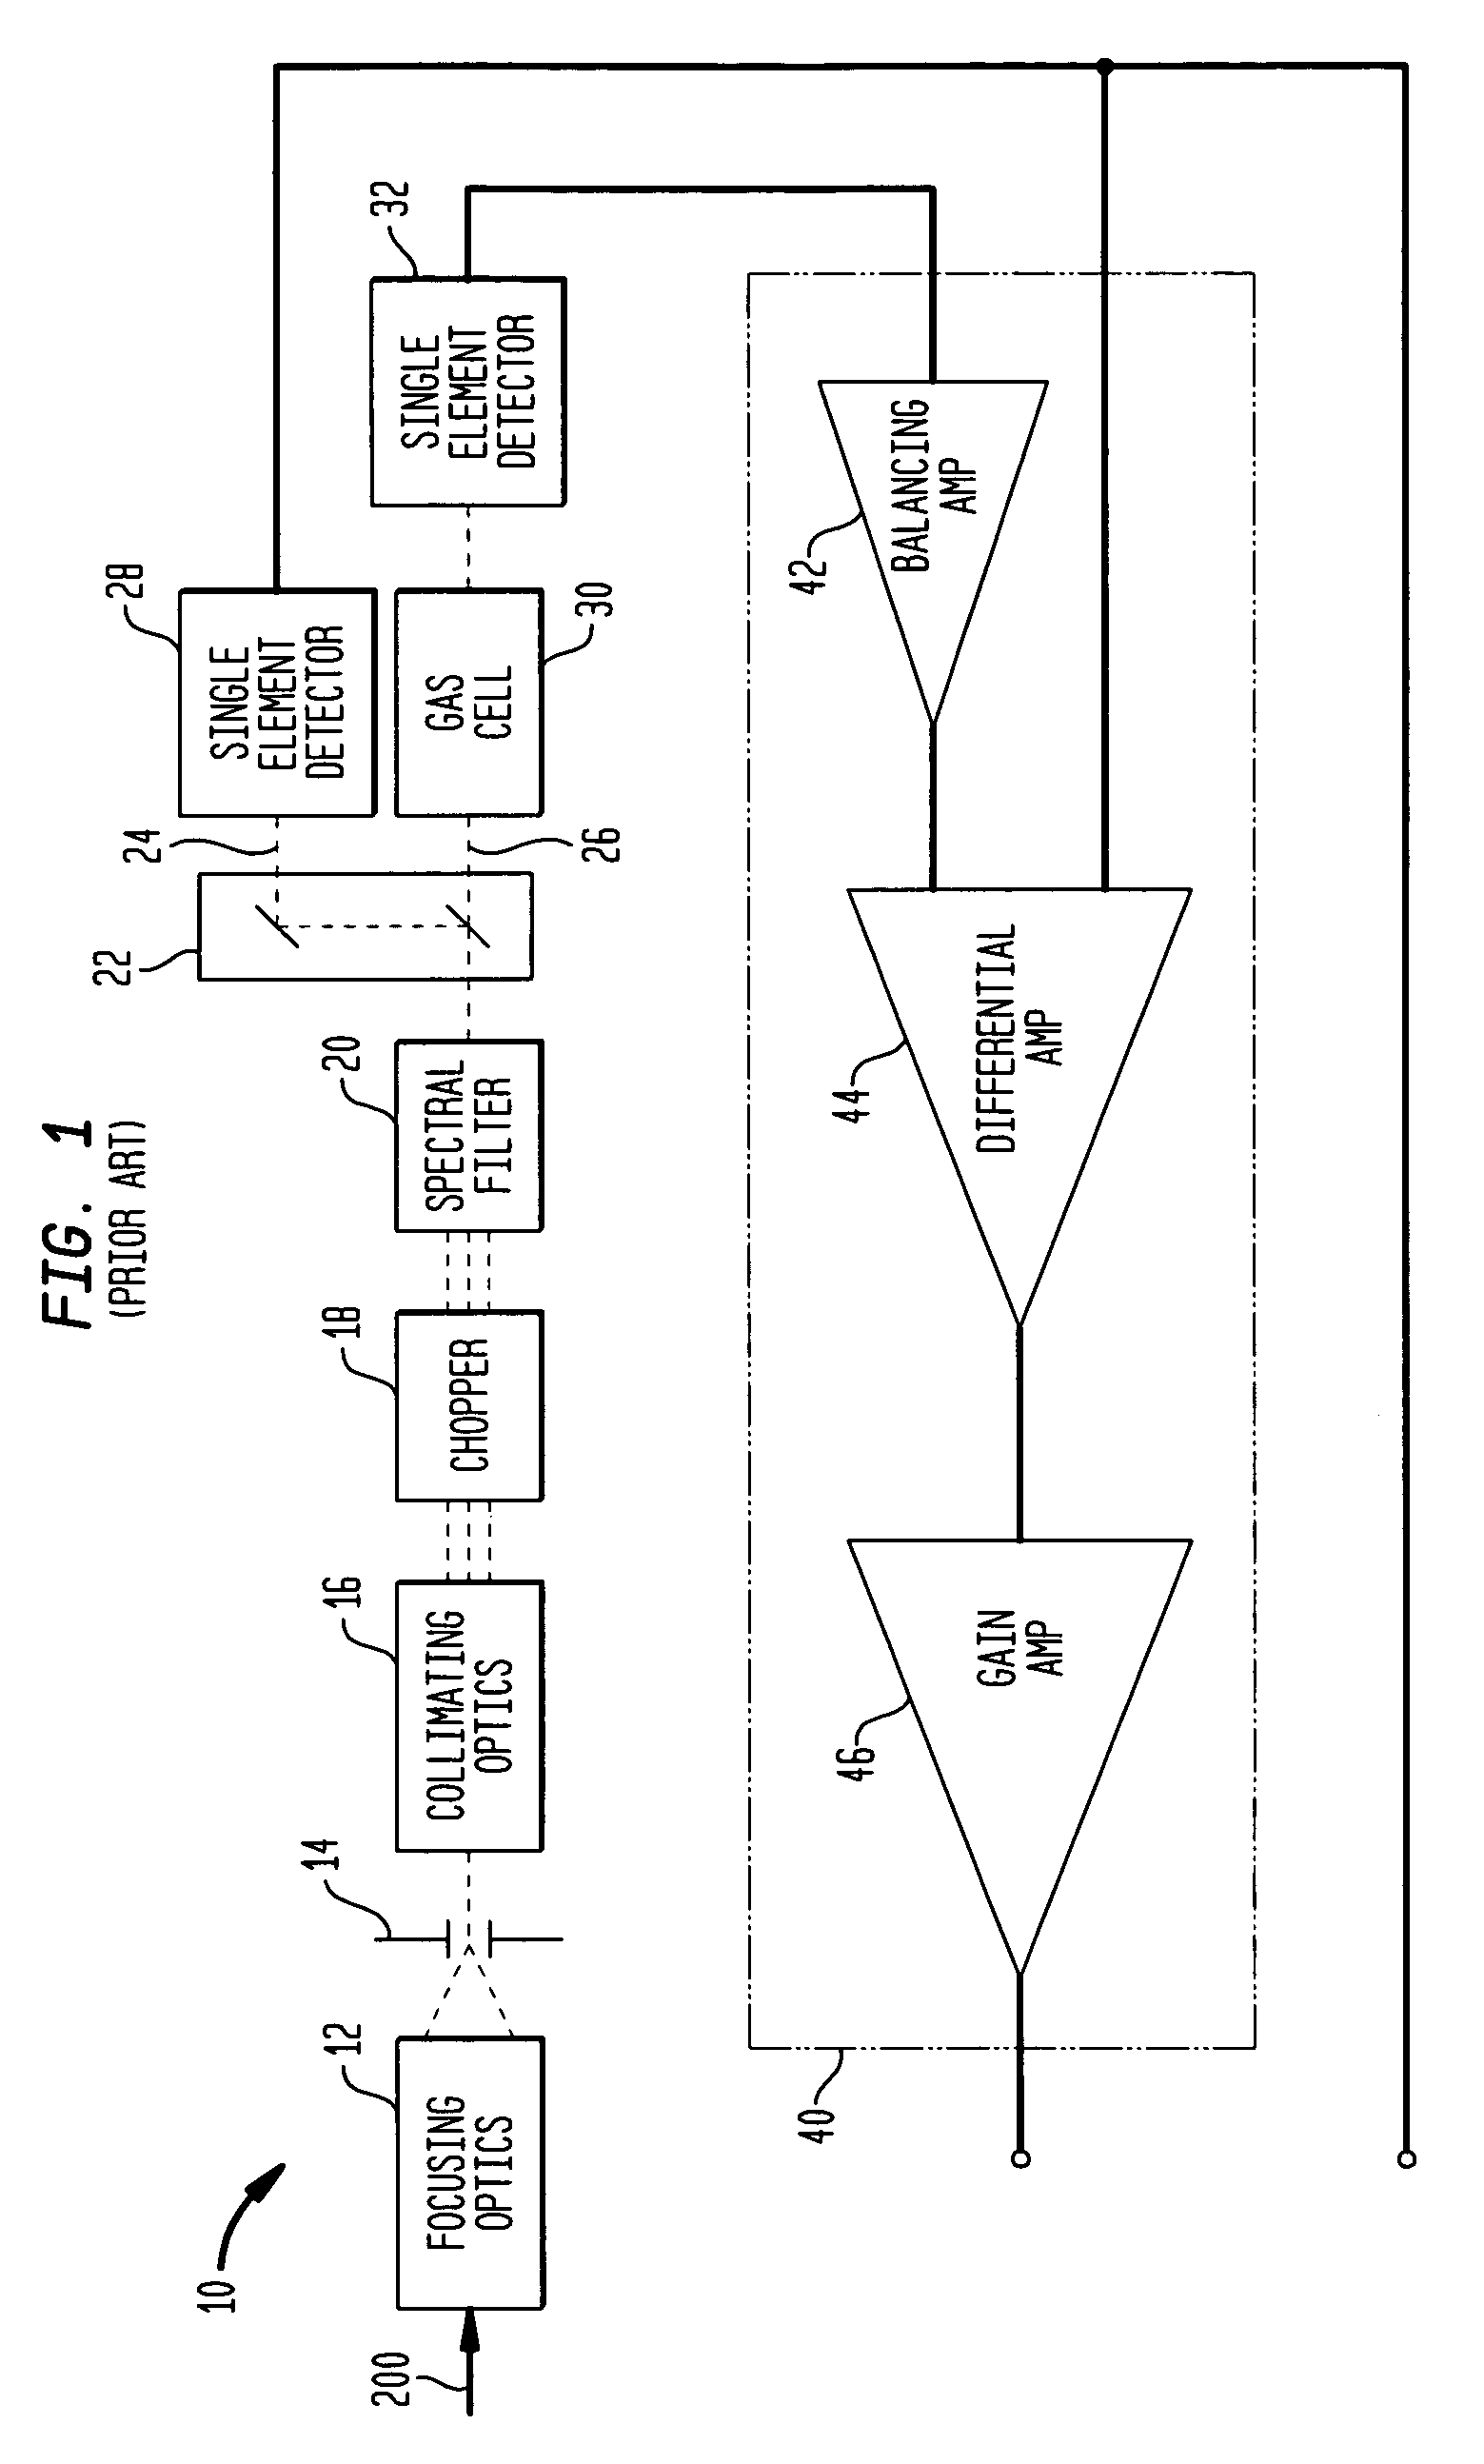 Internally-calibrated, two-detector gas filter correlation radiometry (GFCR) system